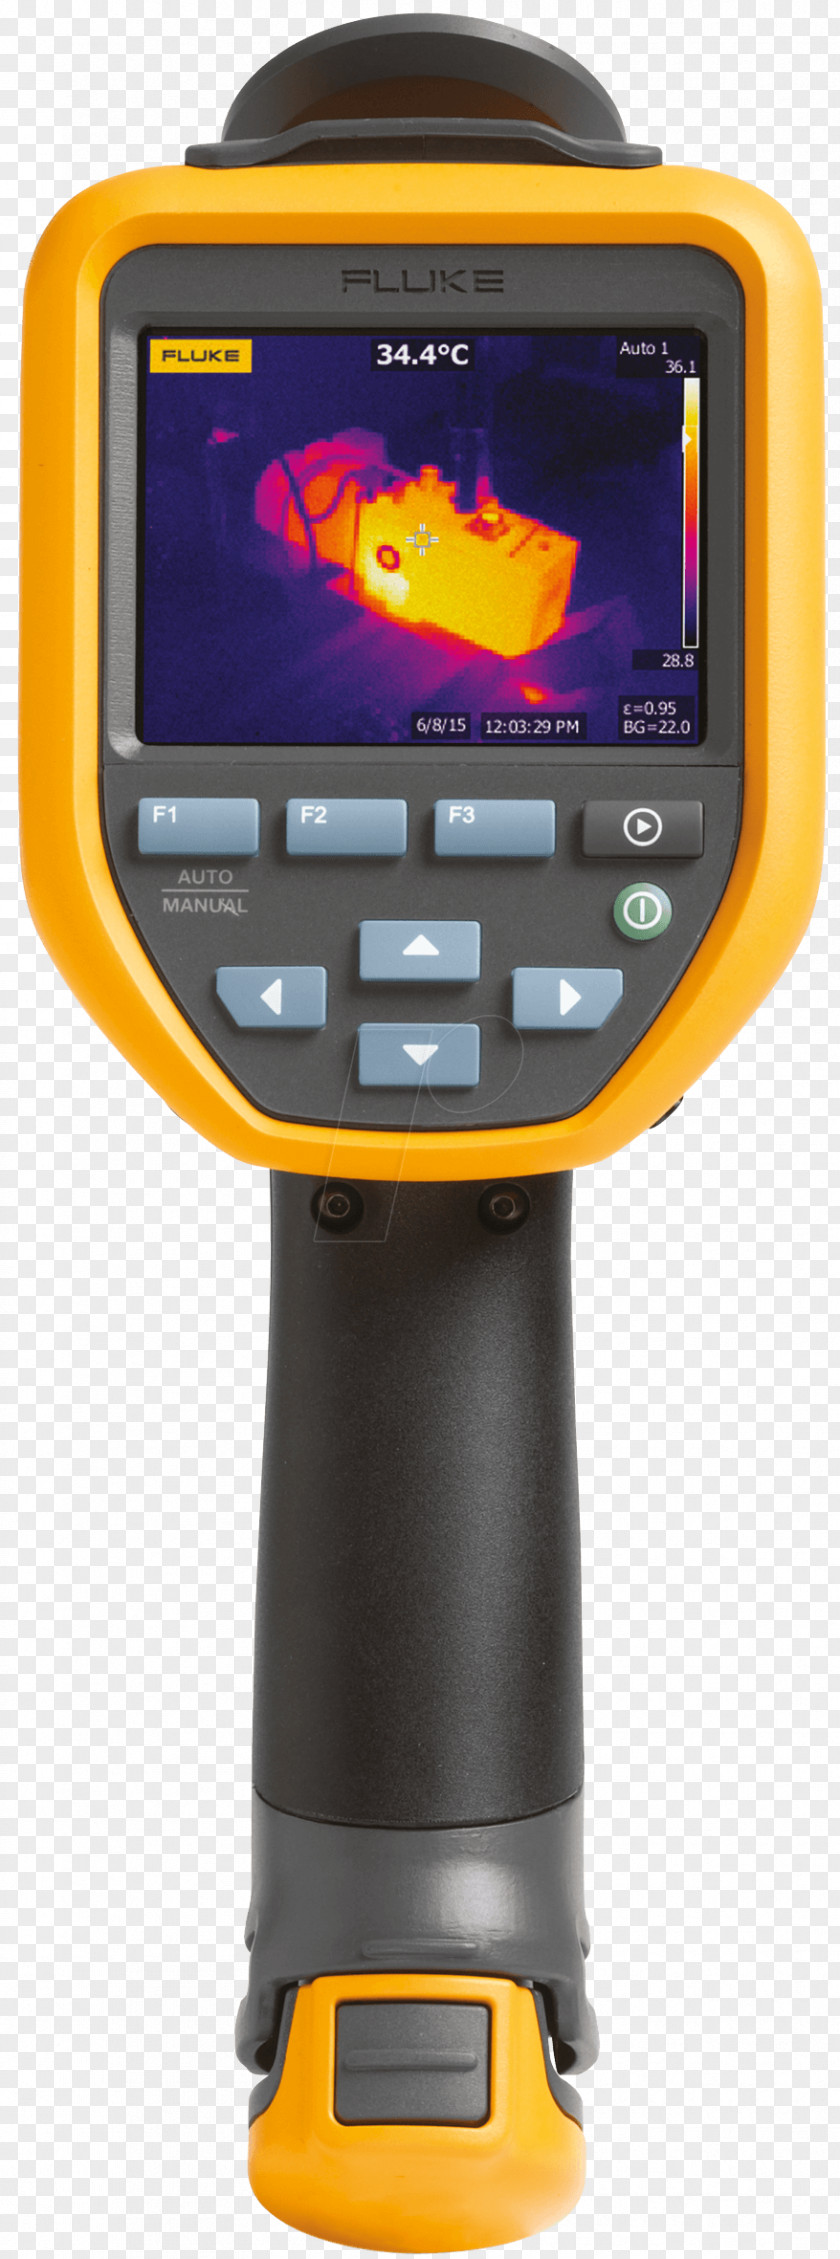 Camera Fluke Corporation Thermographic Thermal Imaging Technologies Pvt. Ltd. PNG